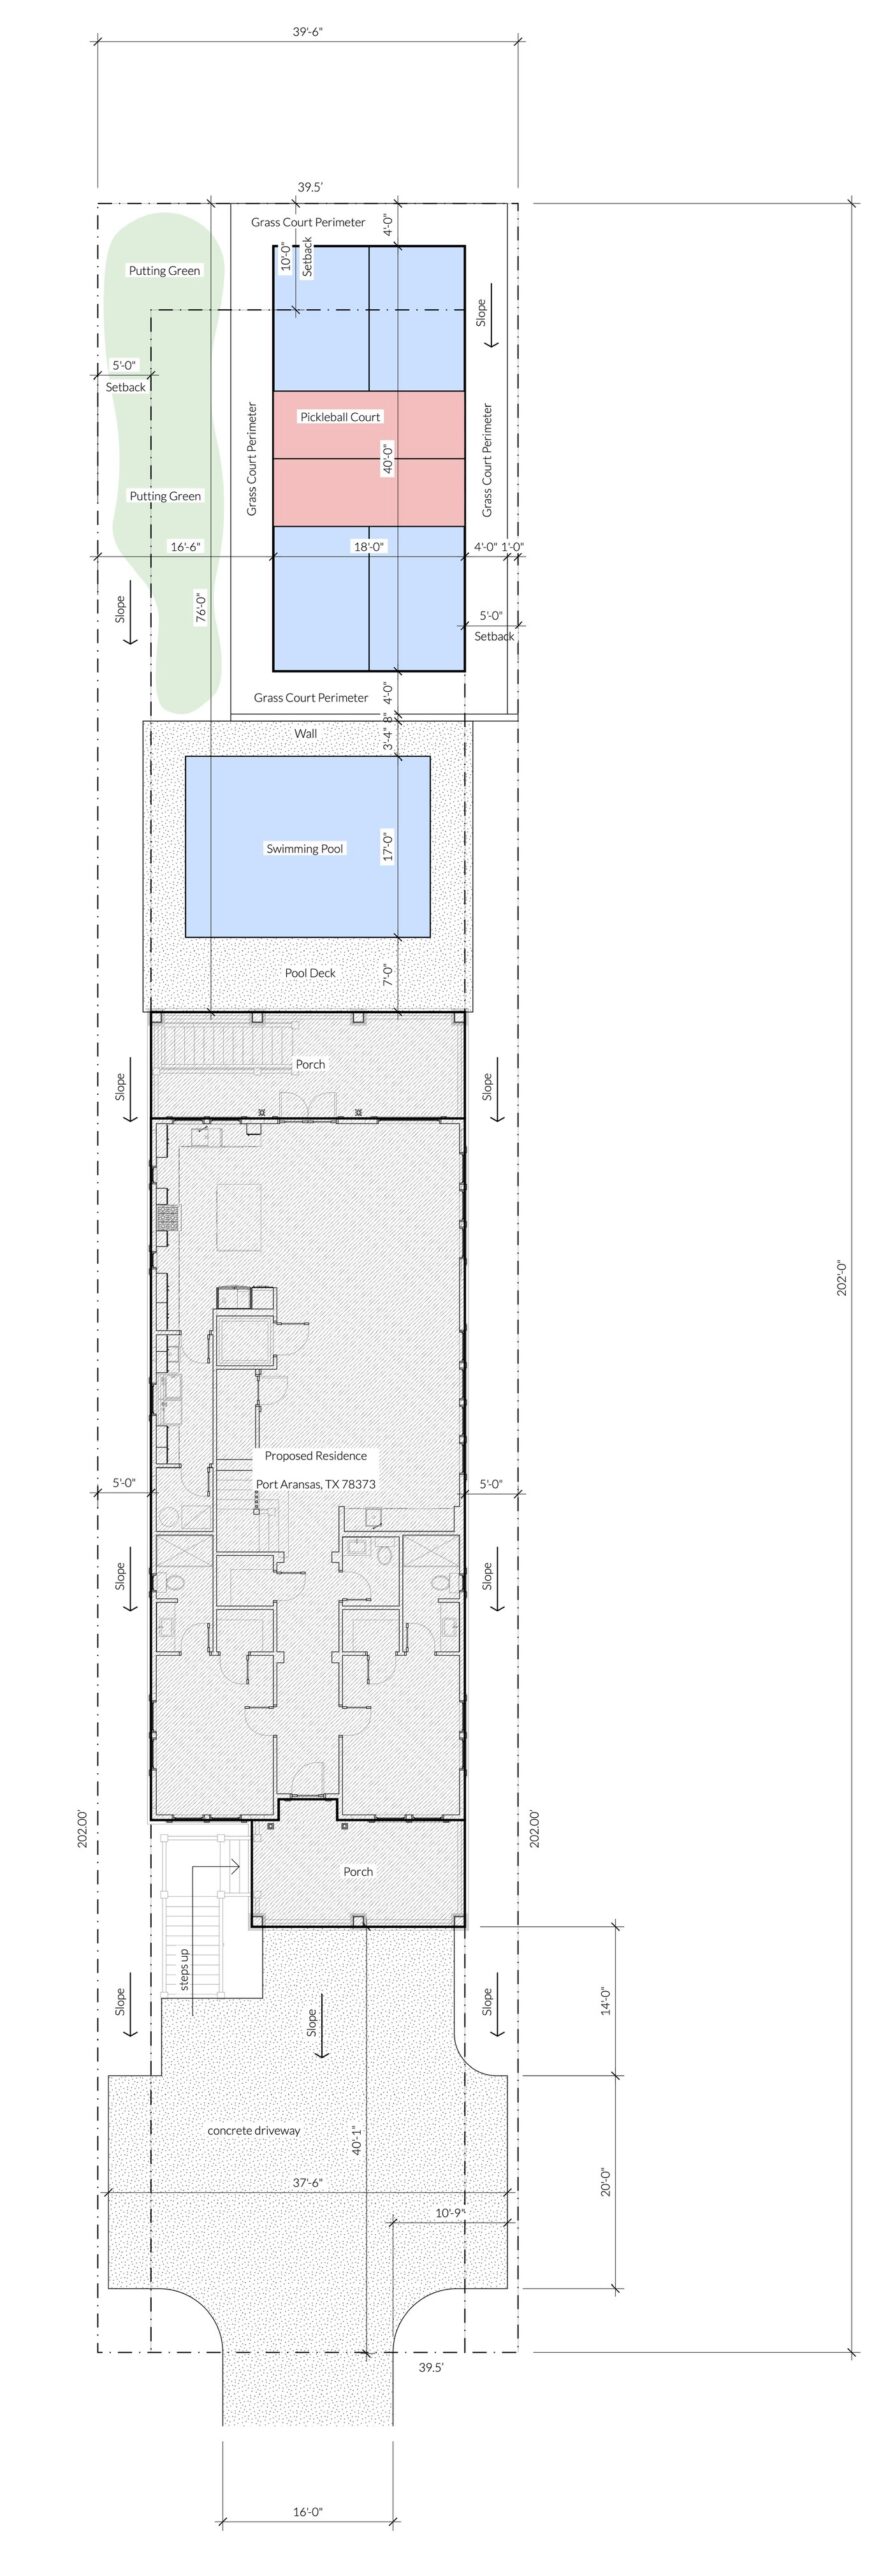 Sample Site Plan 5 by Tyree House Plans